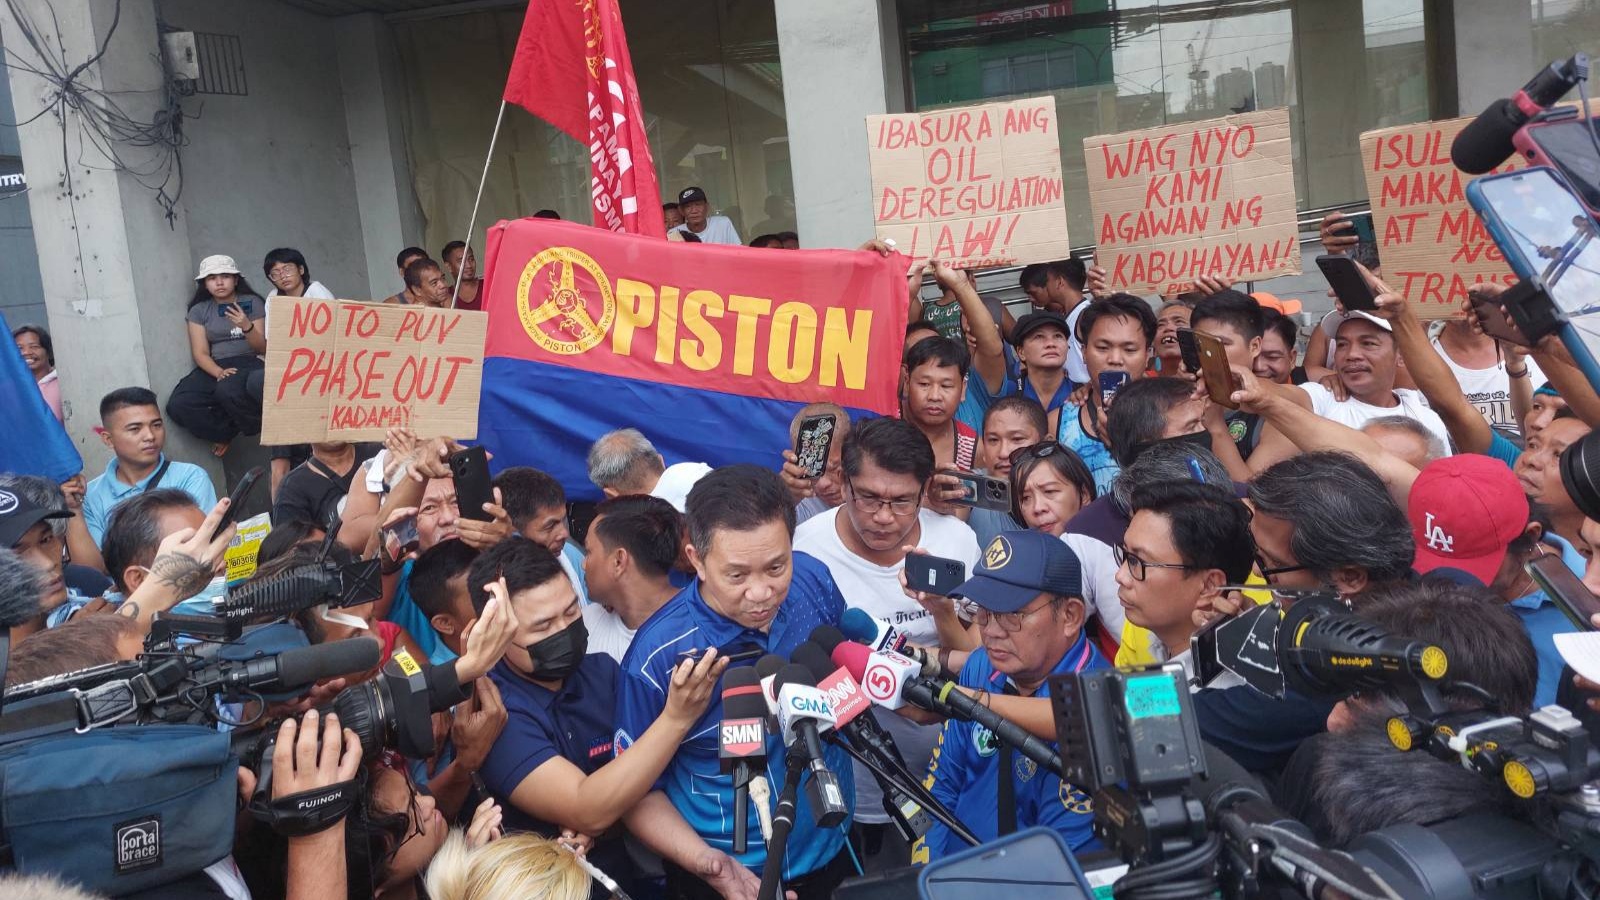 ‘Tuloy ang welga’: PISTON pushes through with second day of strike